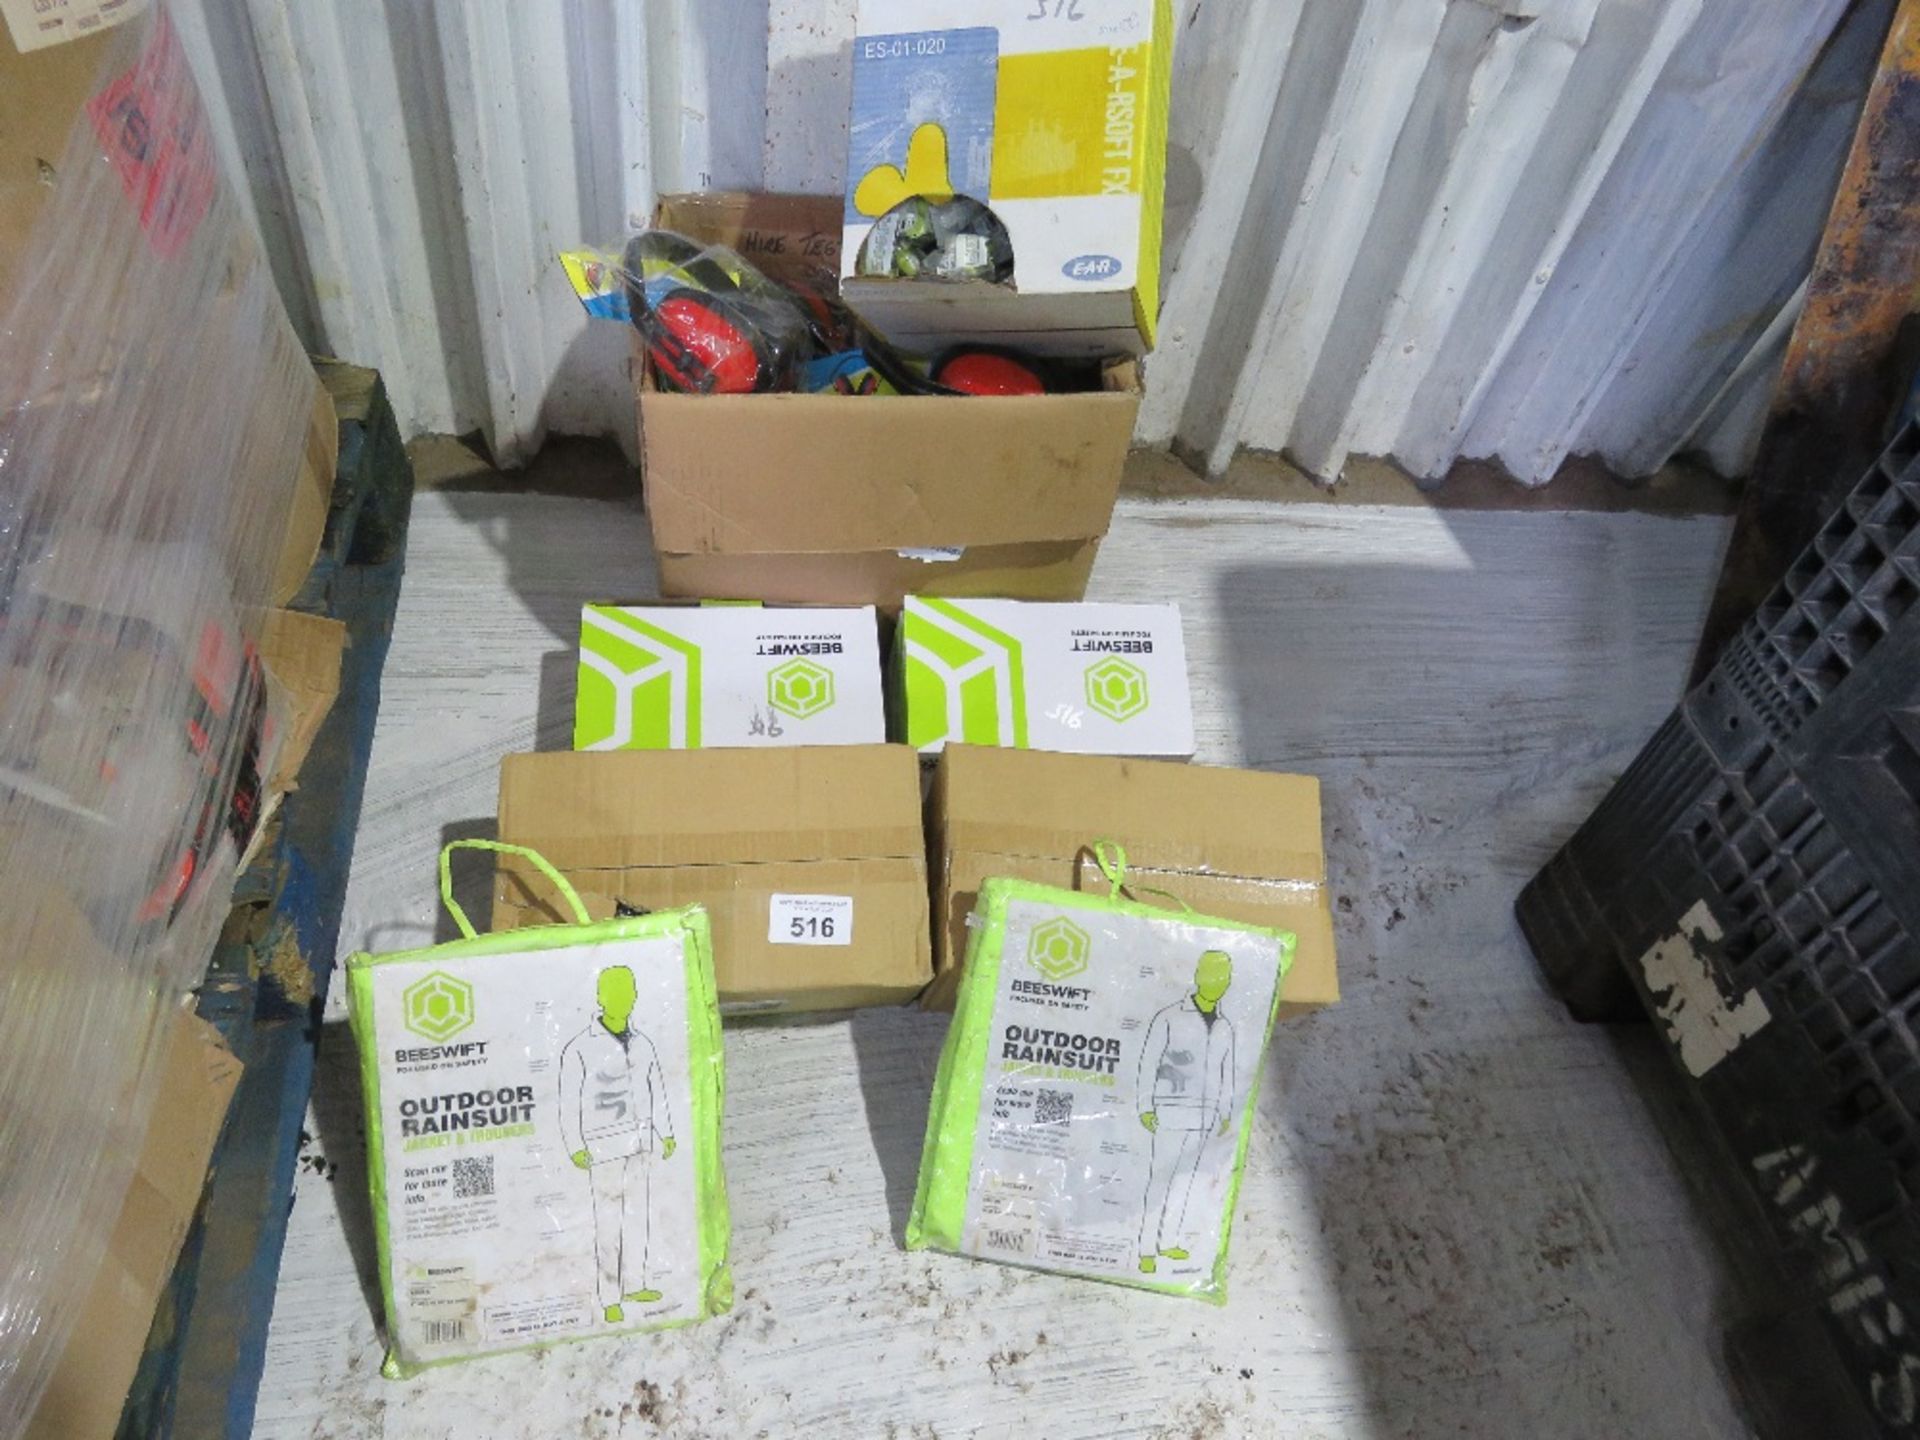 SAFETY ITEMS: EAR PLUGS, GOGGLES, EAR MUFFS ETC. SOURCED FROM COMPANY LIQUIDATION. THIS LOT IS S